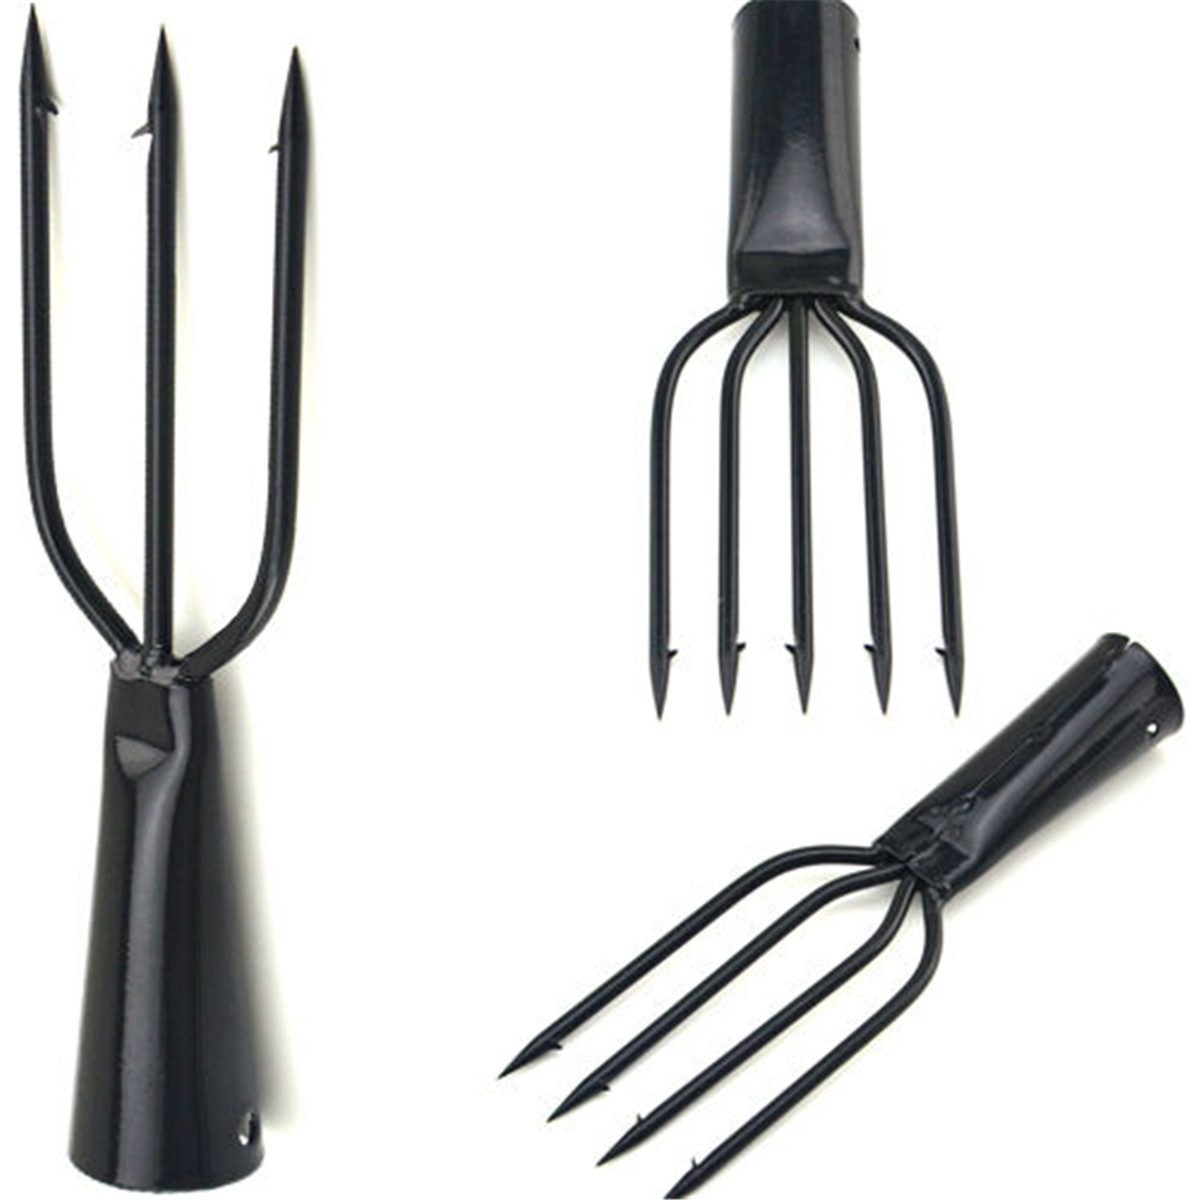 3/4 Prong Tine Barbed Stainless Steel Fishing Fork Spear Gaff Frog ...